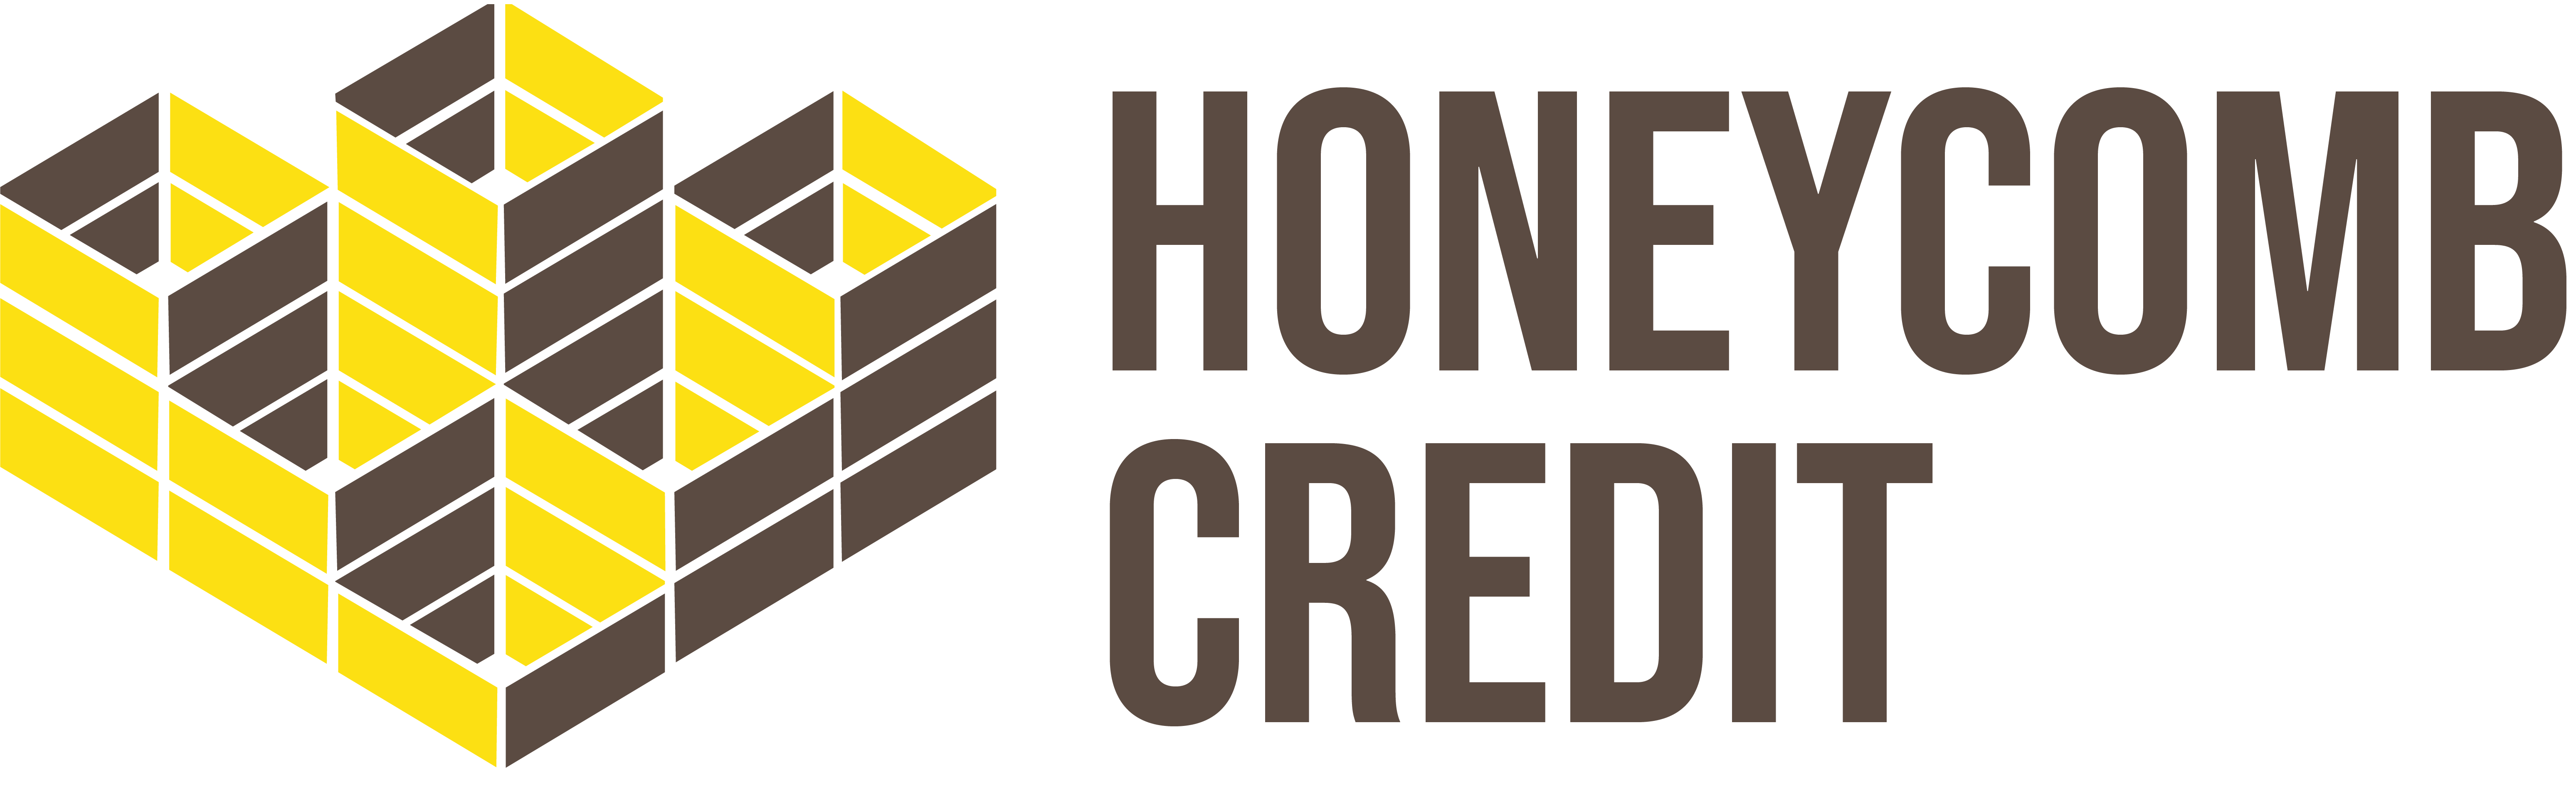 Honeycomb Credit Secures $6 Million Seed+ Funding Round To Close The Growing Funding Gap For Small Businesses